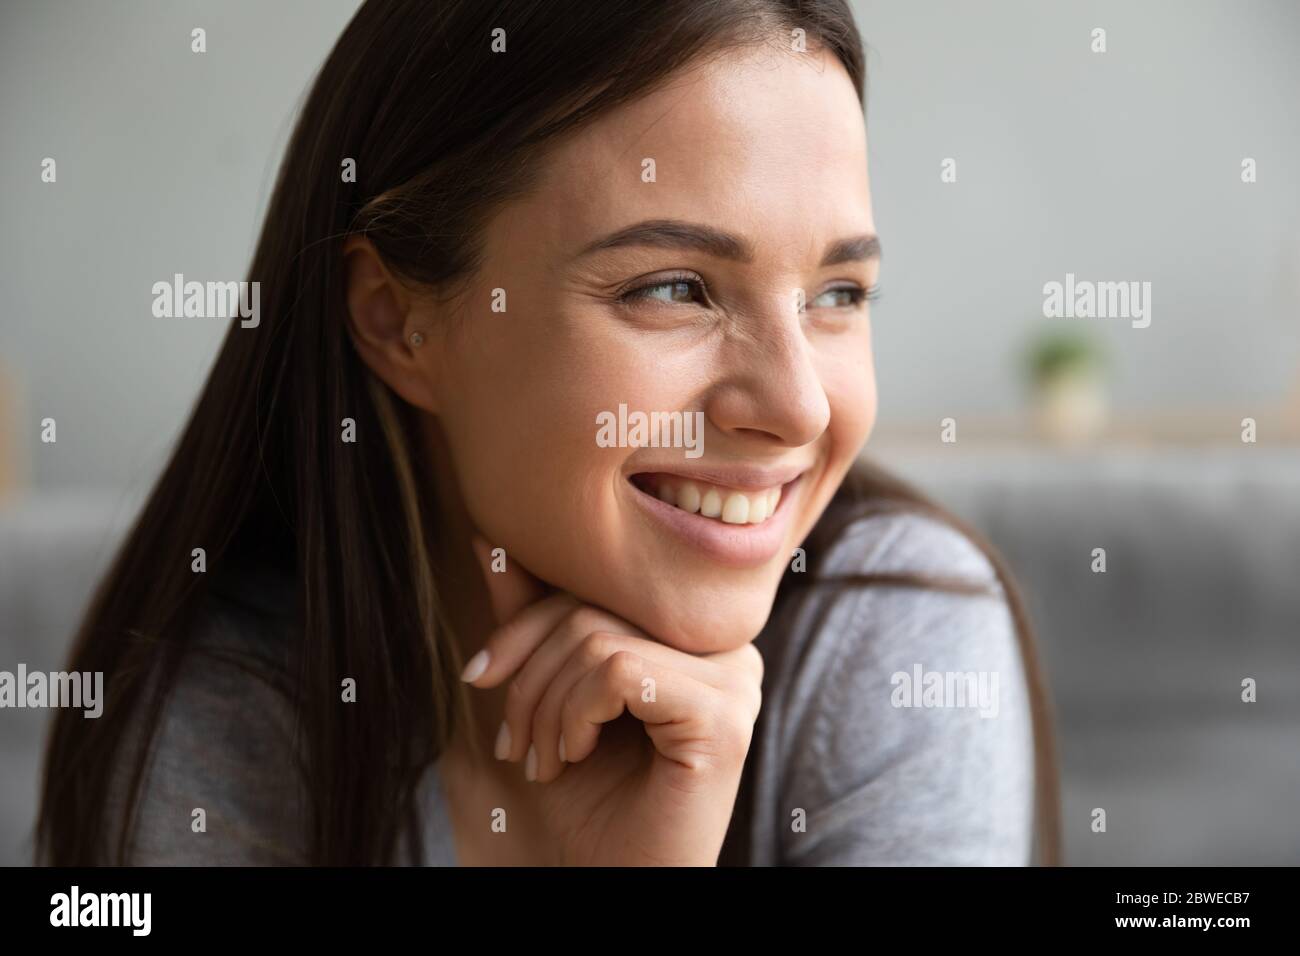 Close up image smiling positive young woman face Stock Photo